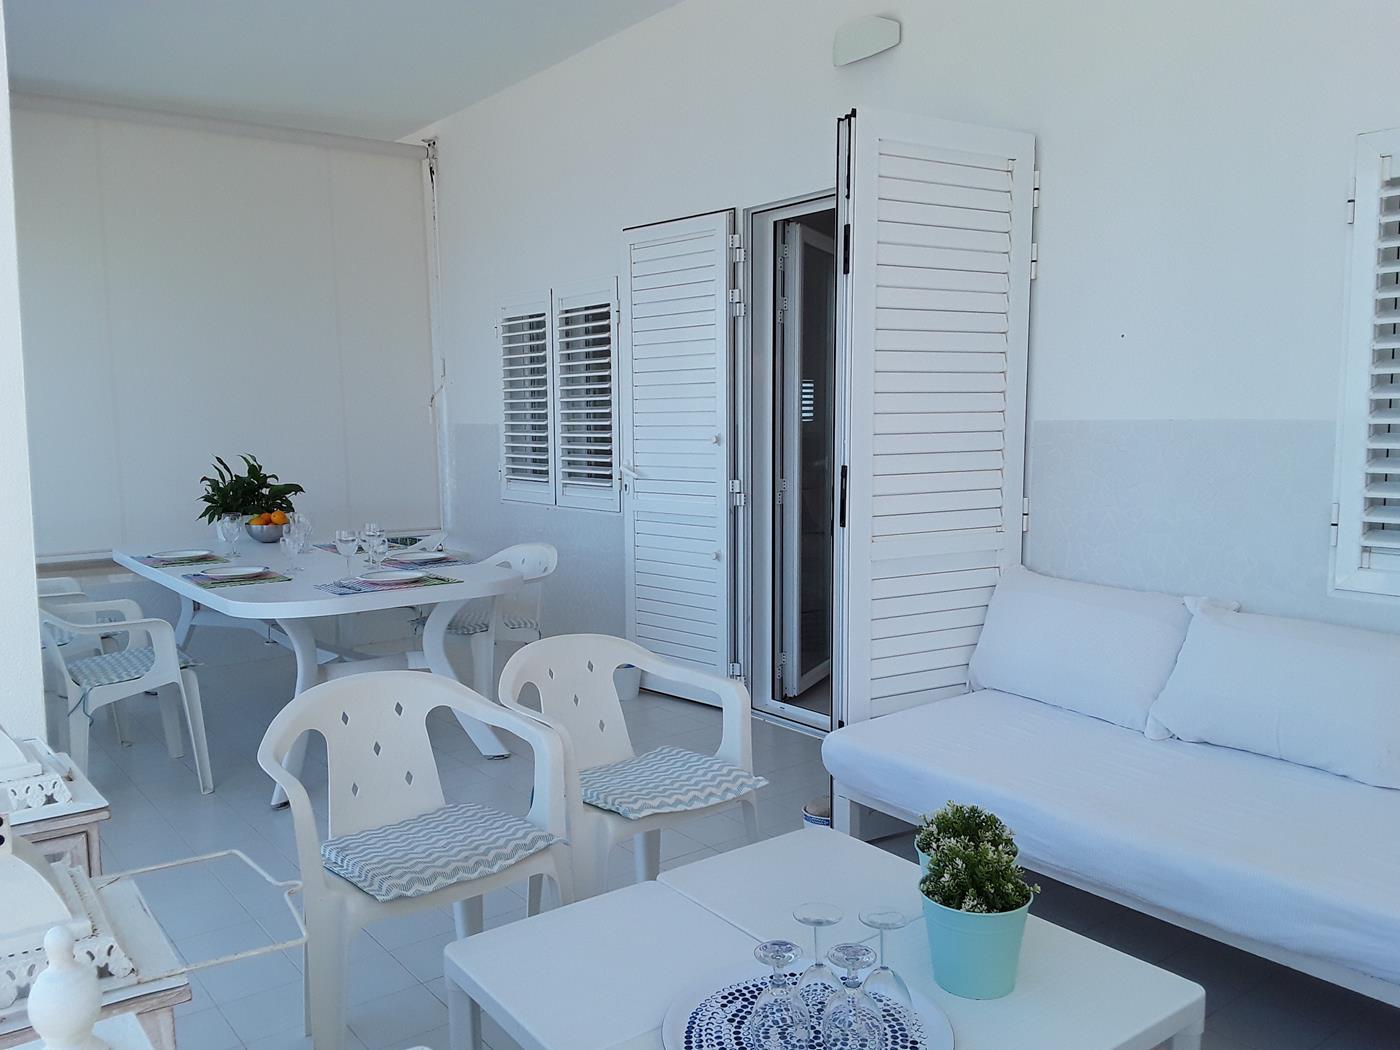 Sale townhouse on the first line in Denia